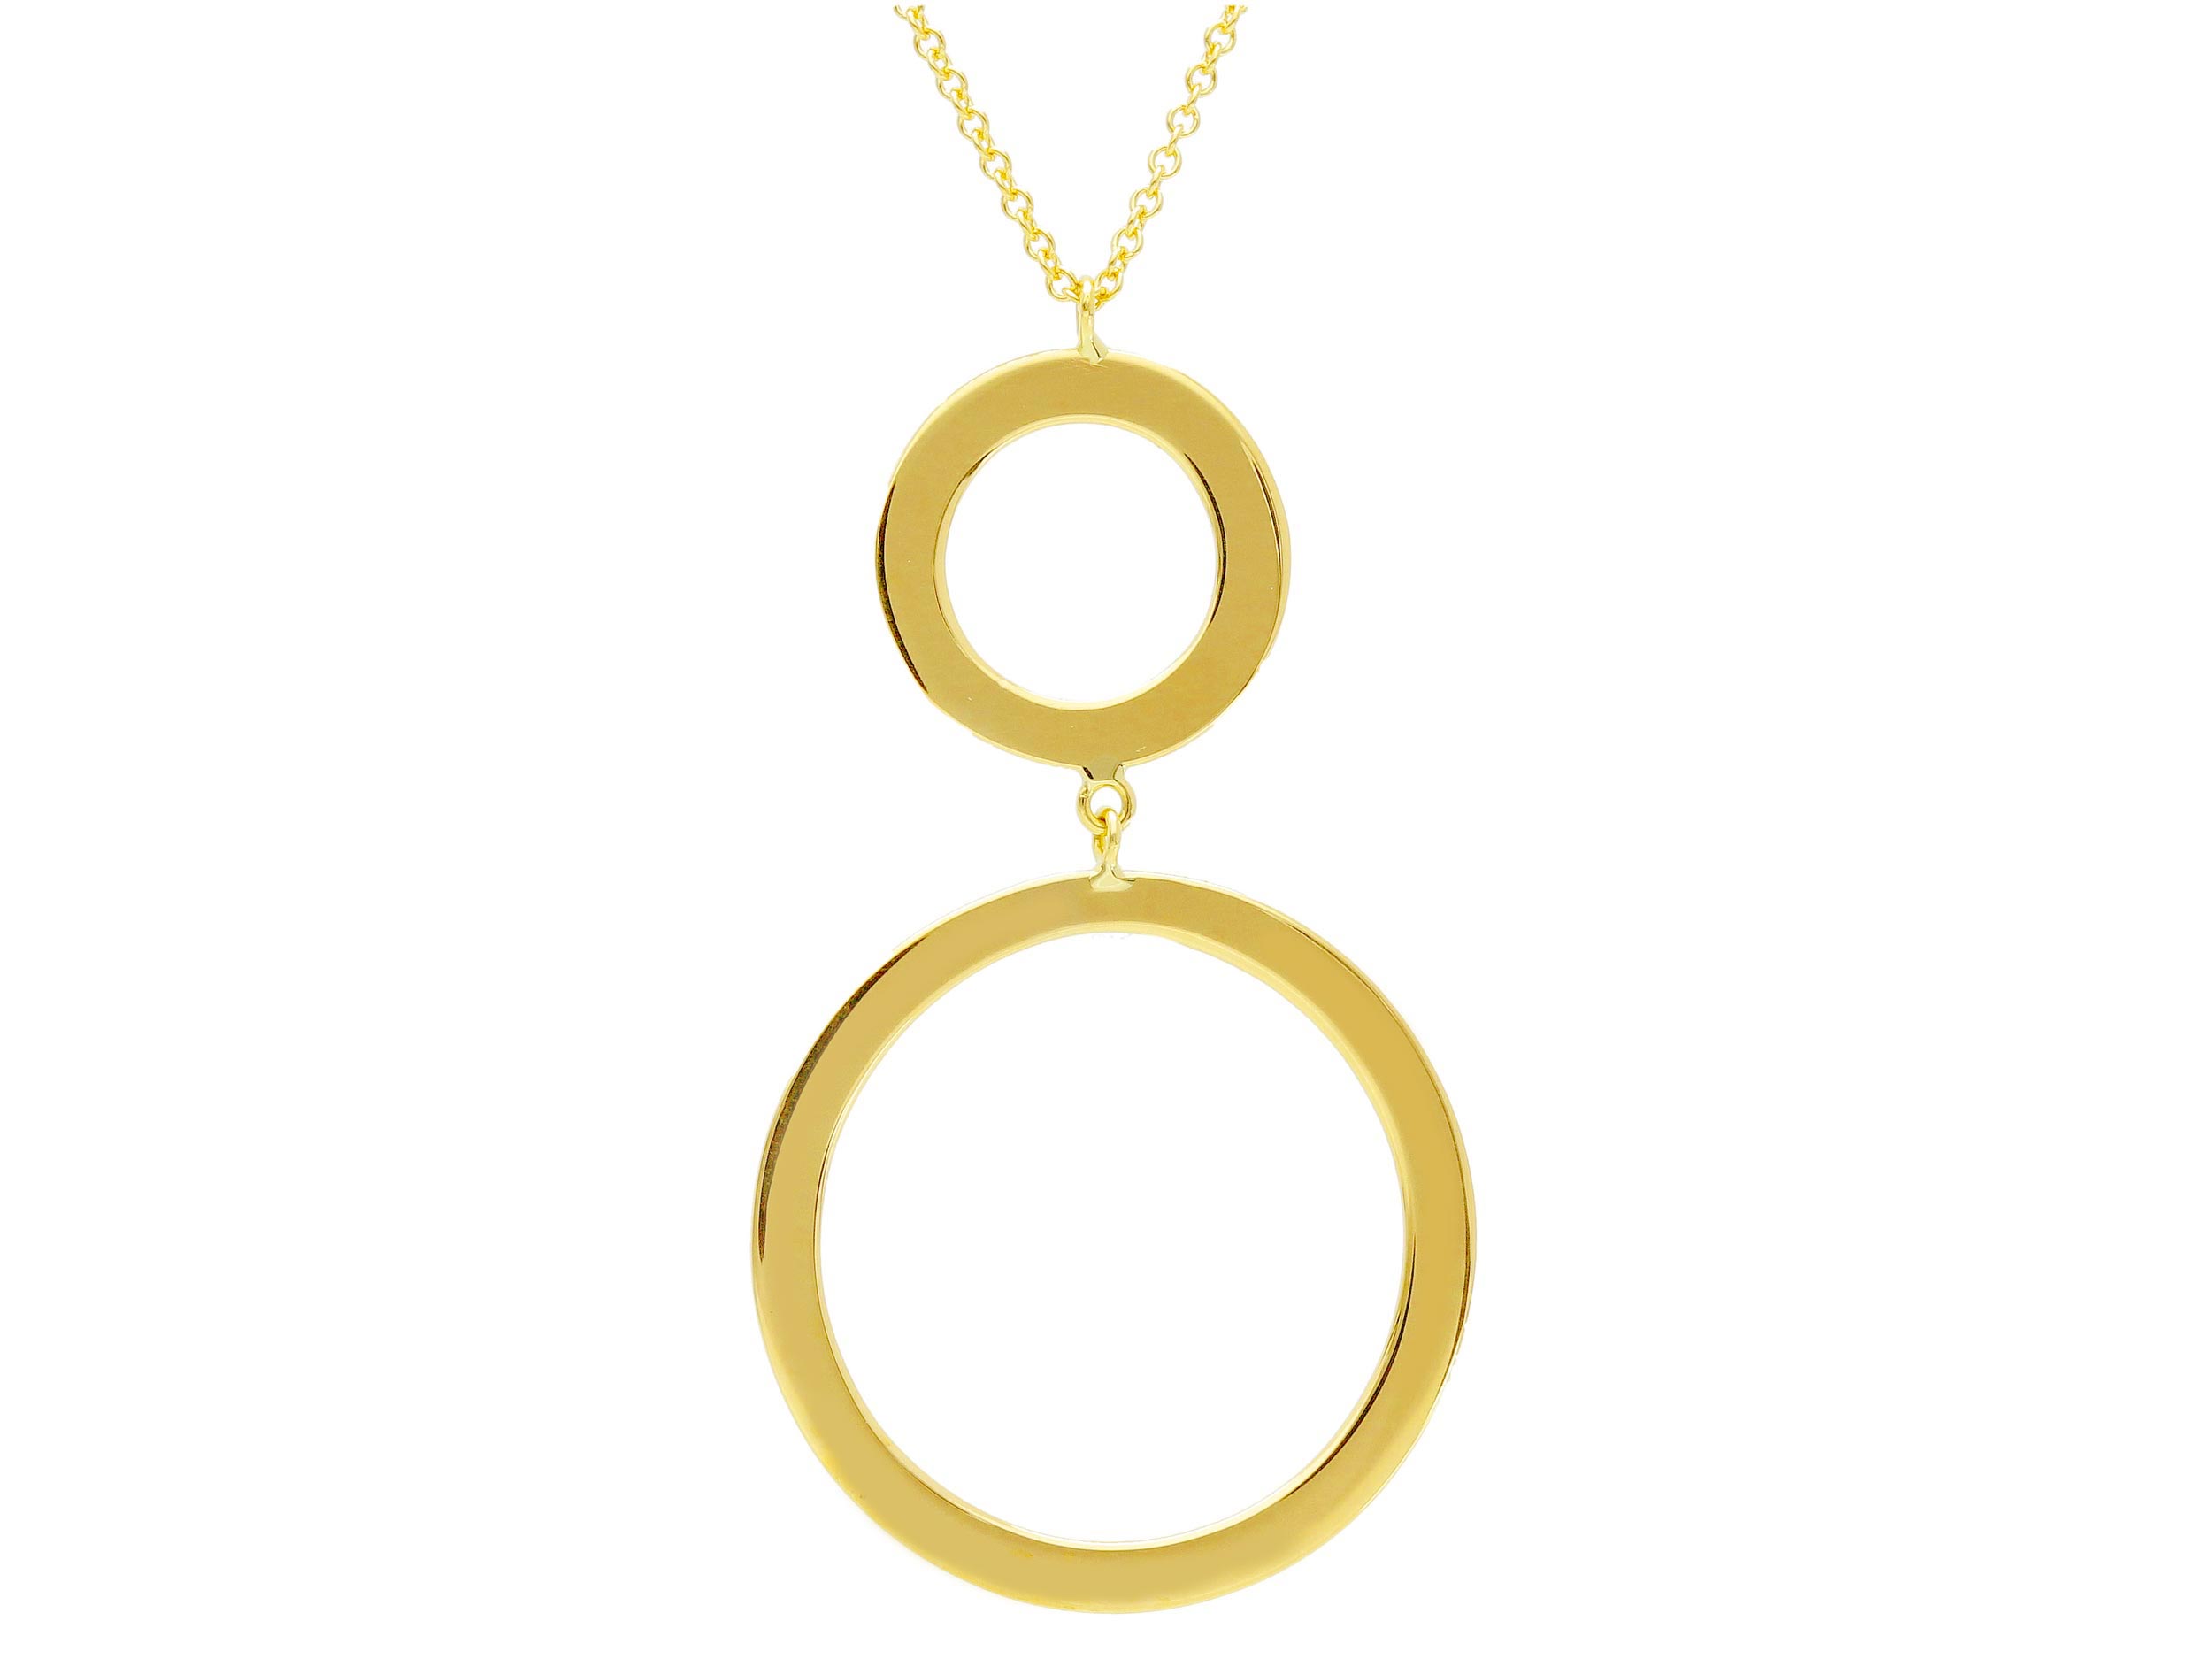 Beautiful 18ct Yellow Gold Fixed Pendant Necklace